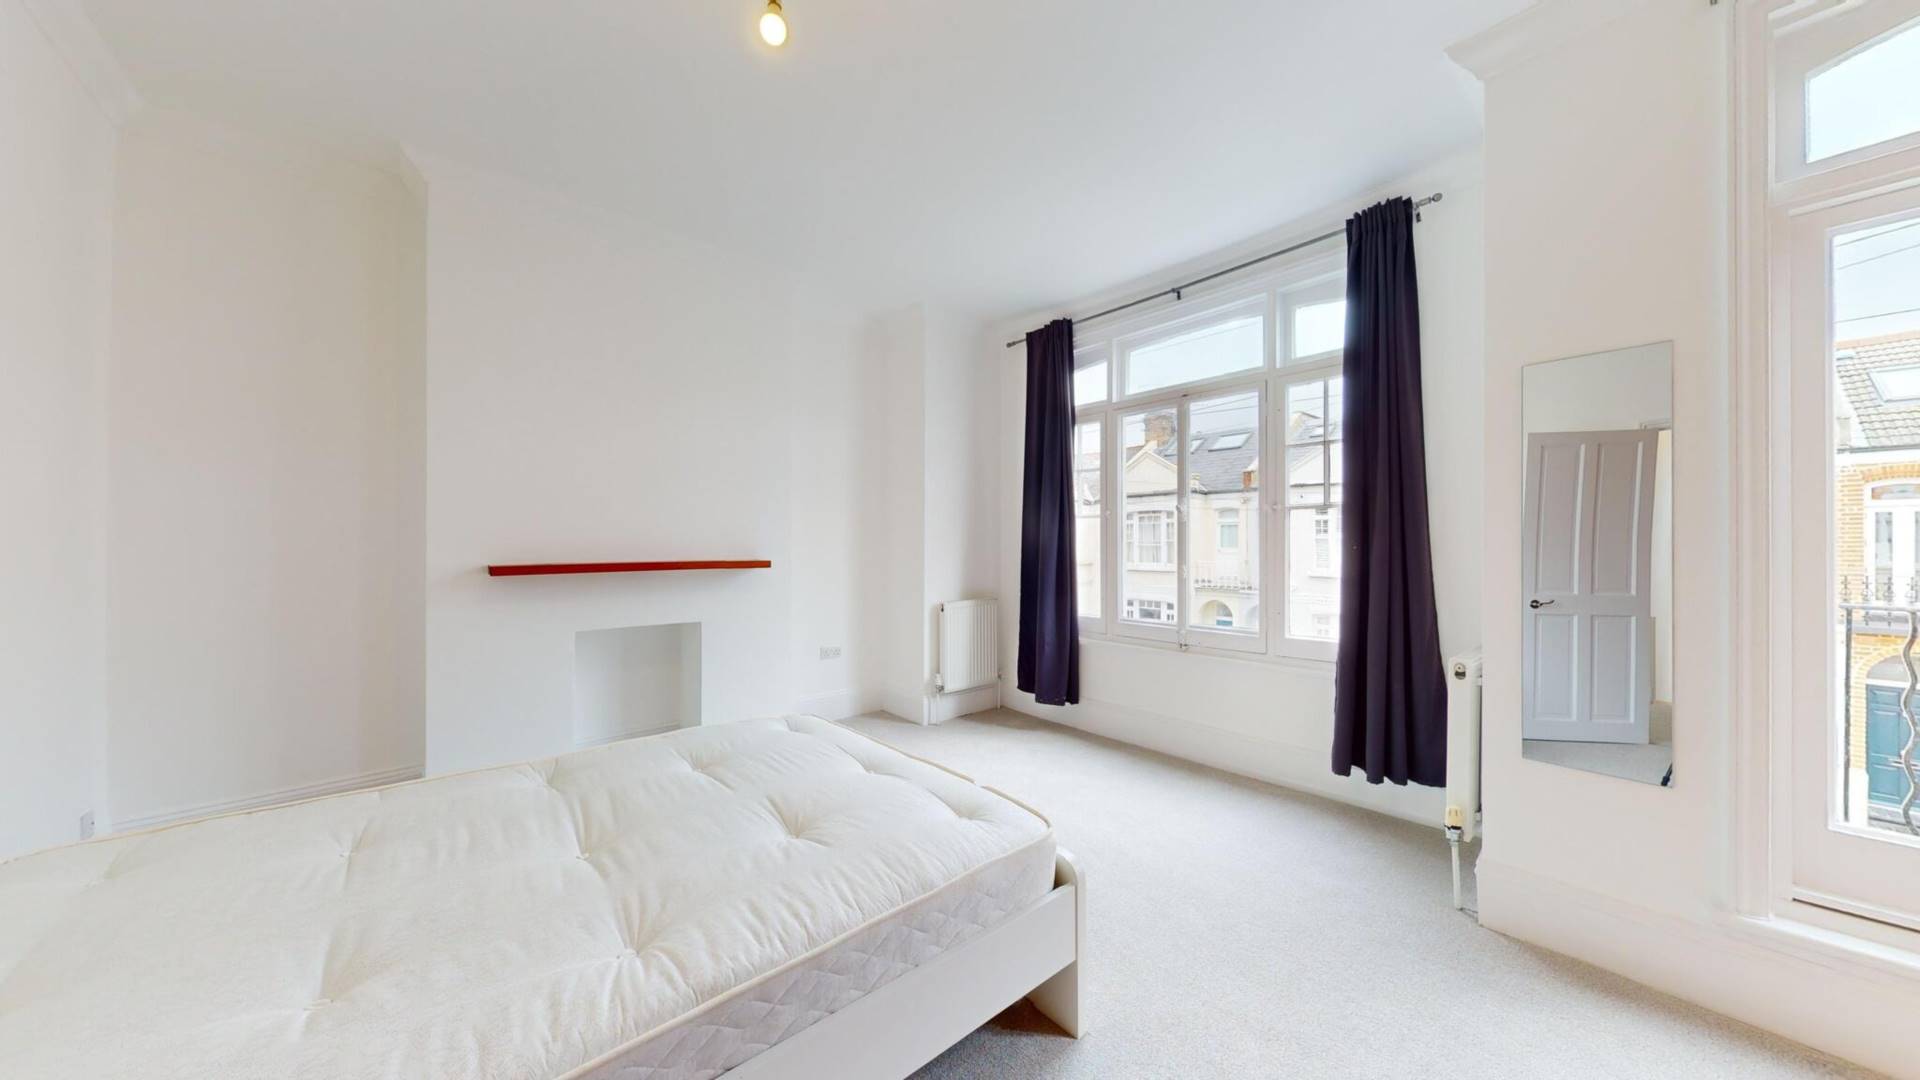 4 bed house, Fabian Road SW6, Image 12